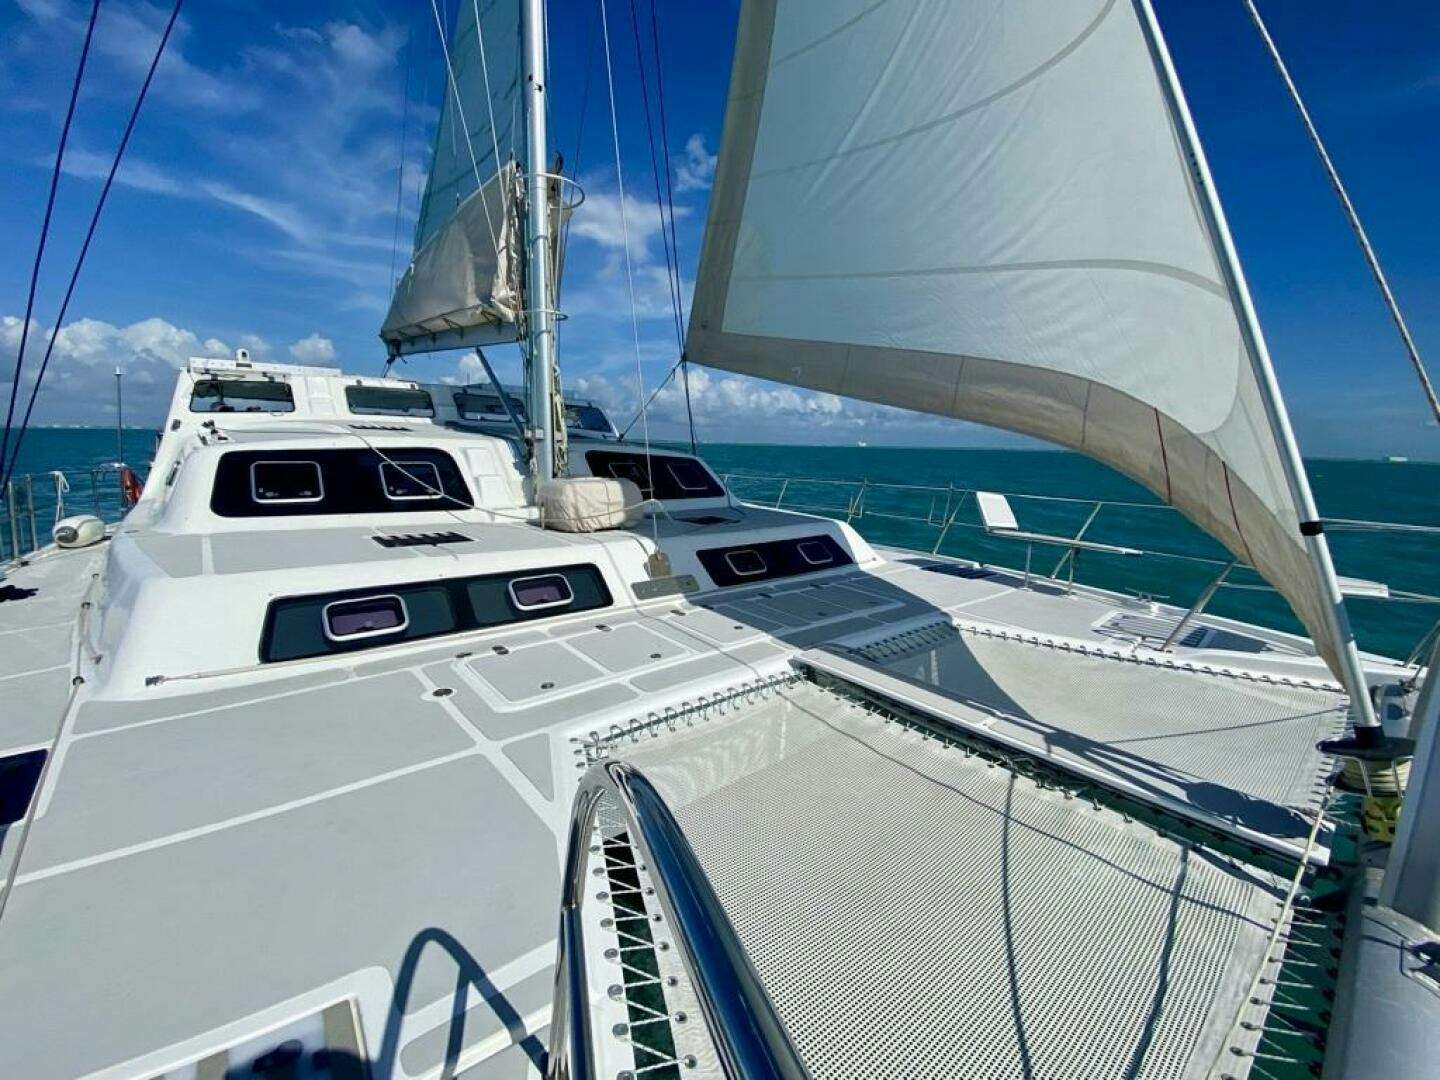 Walk about
Yacht for Sale